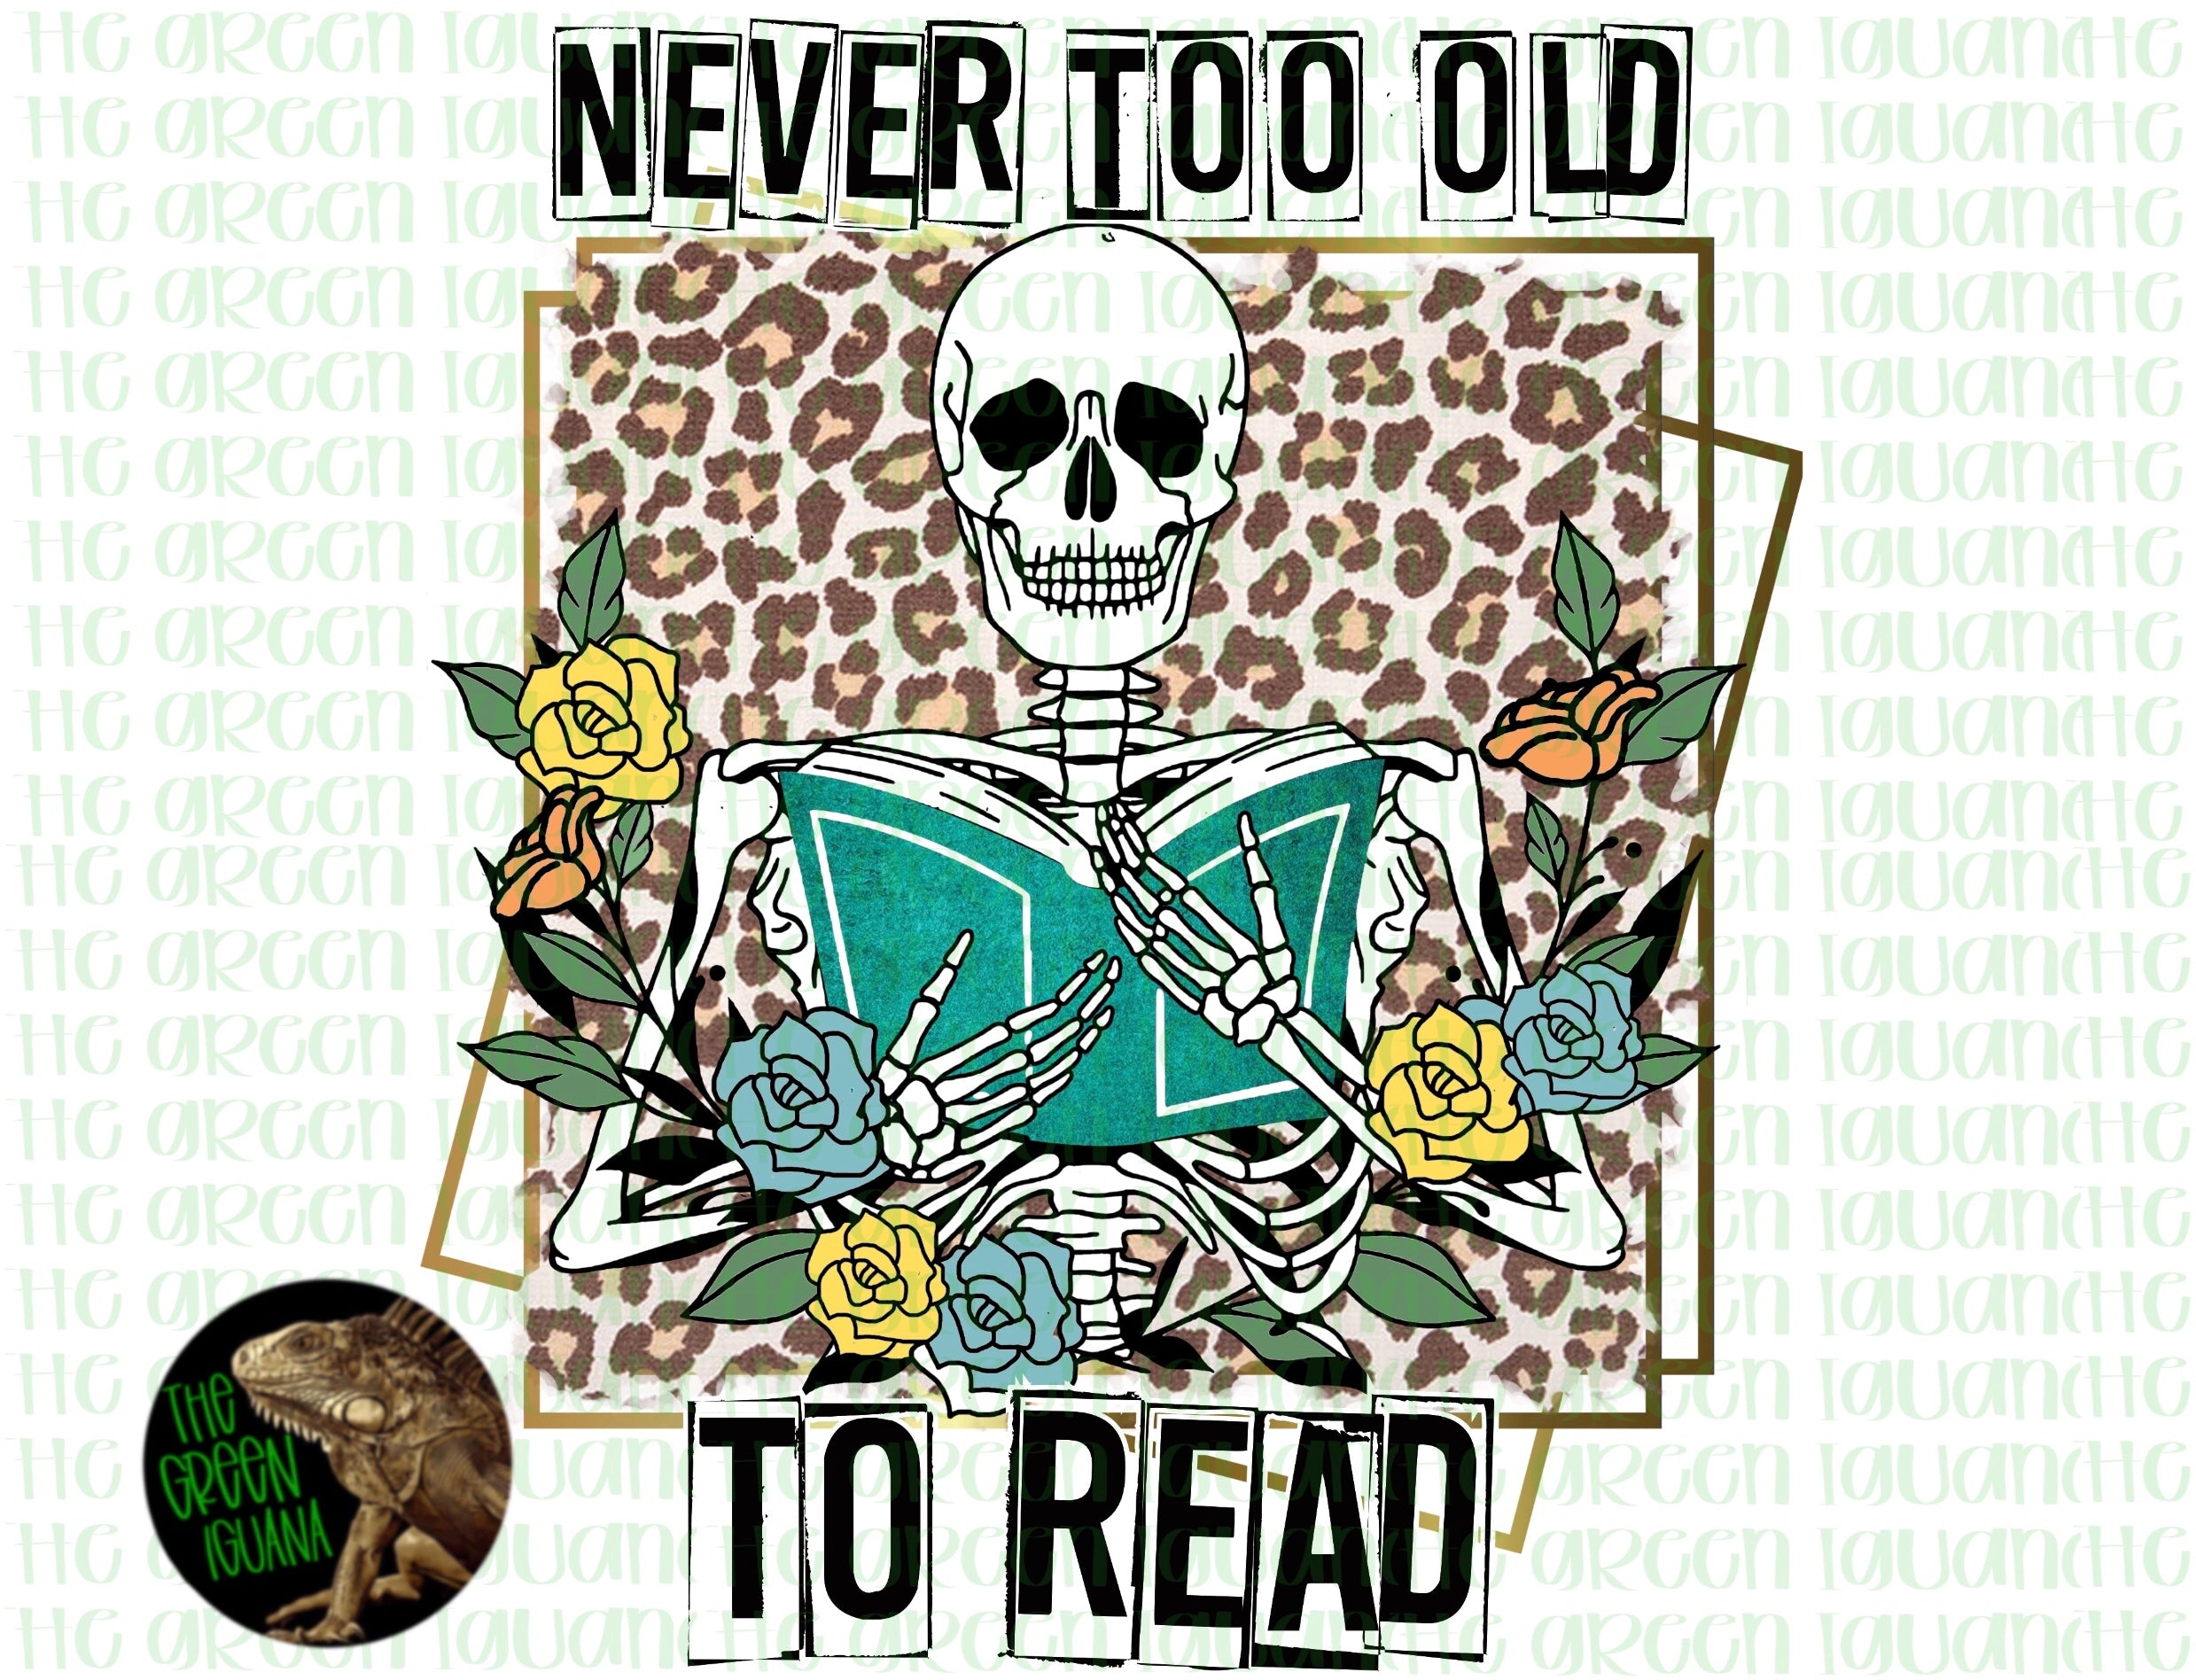 Never too old to read - DIGITAL